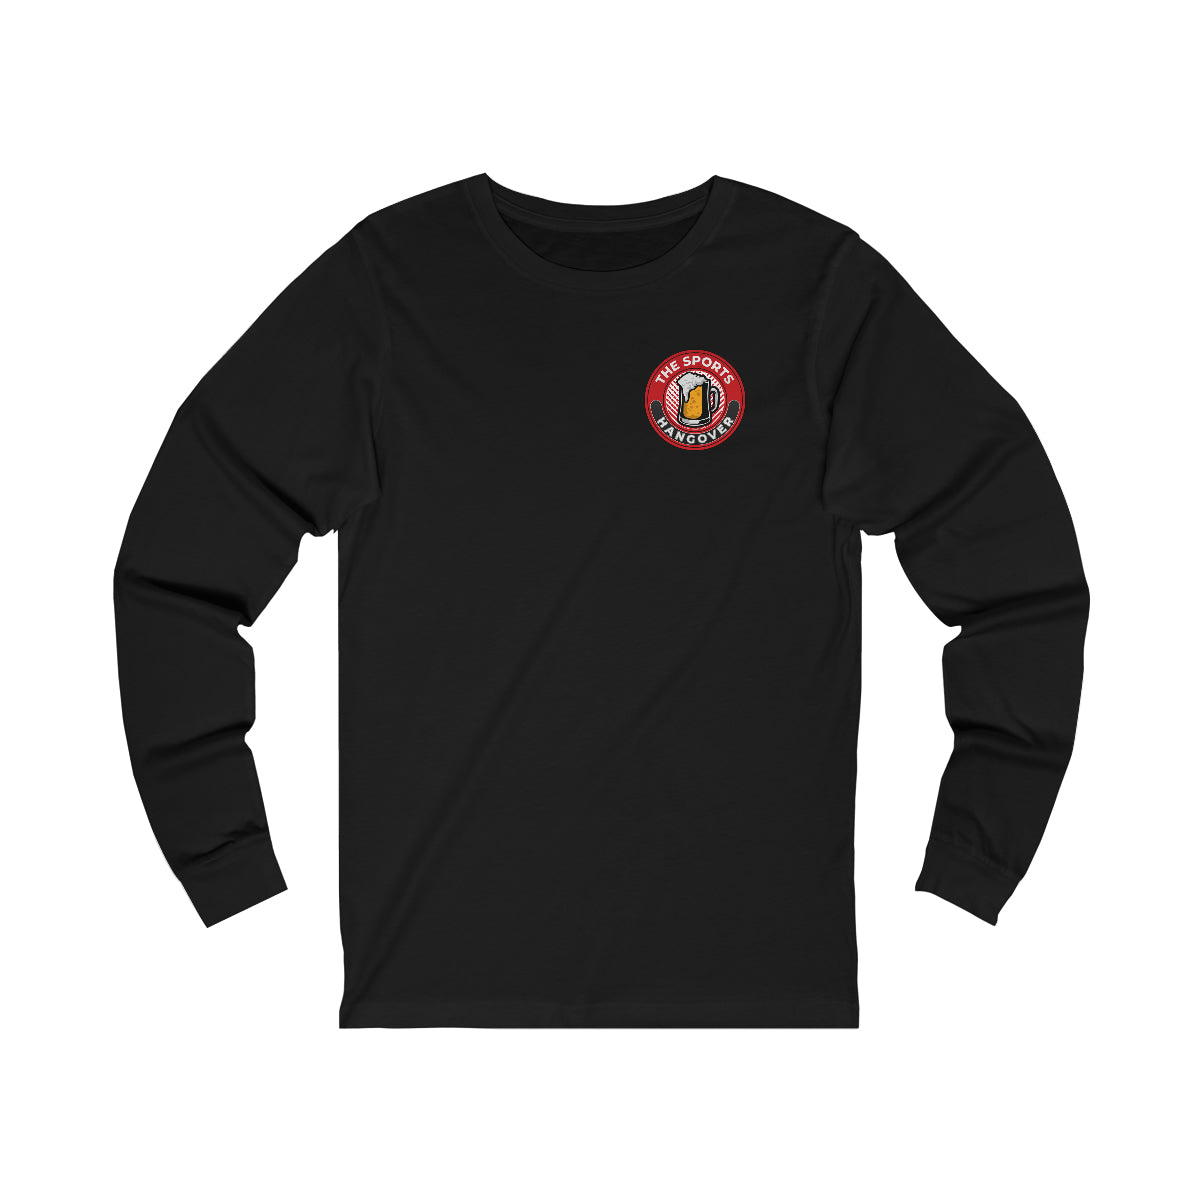 The Sports Hangover Drinking Long Sleeve Tee